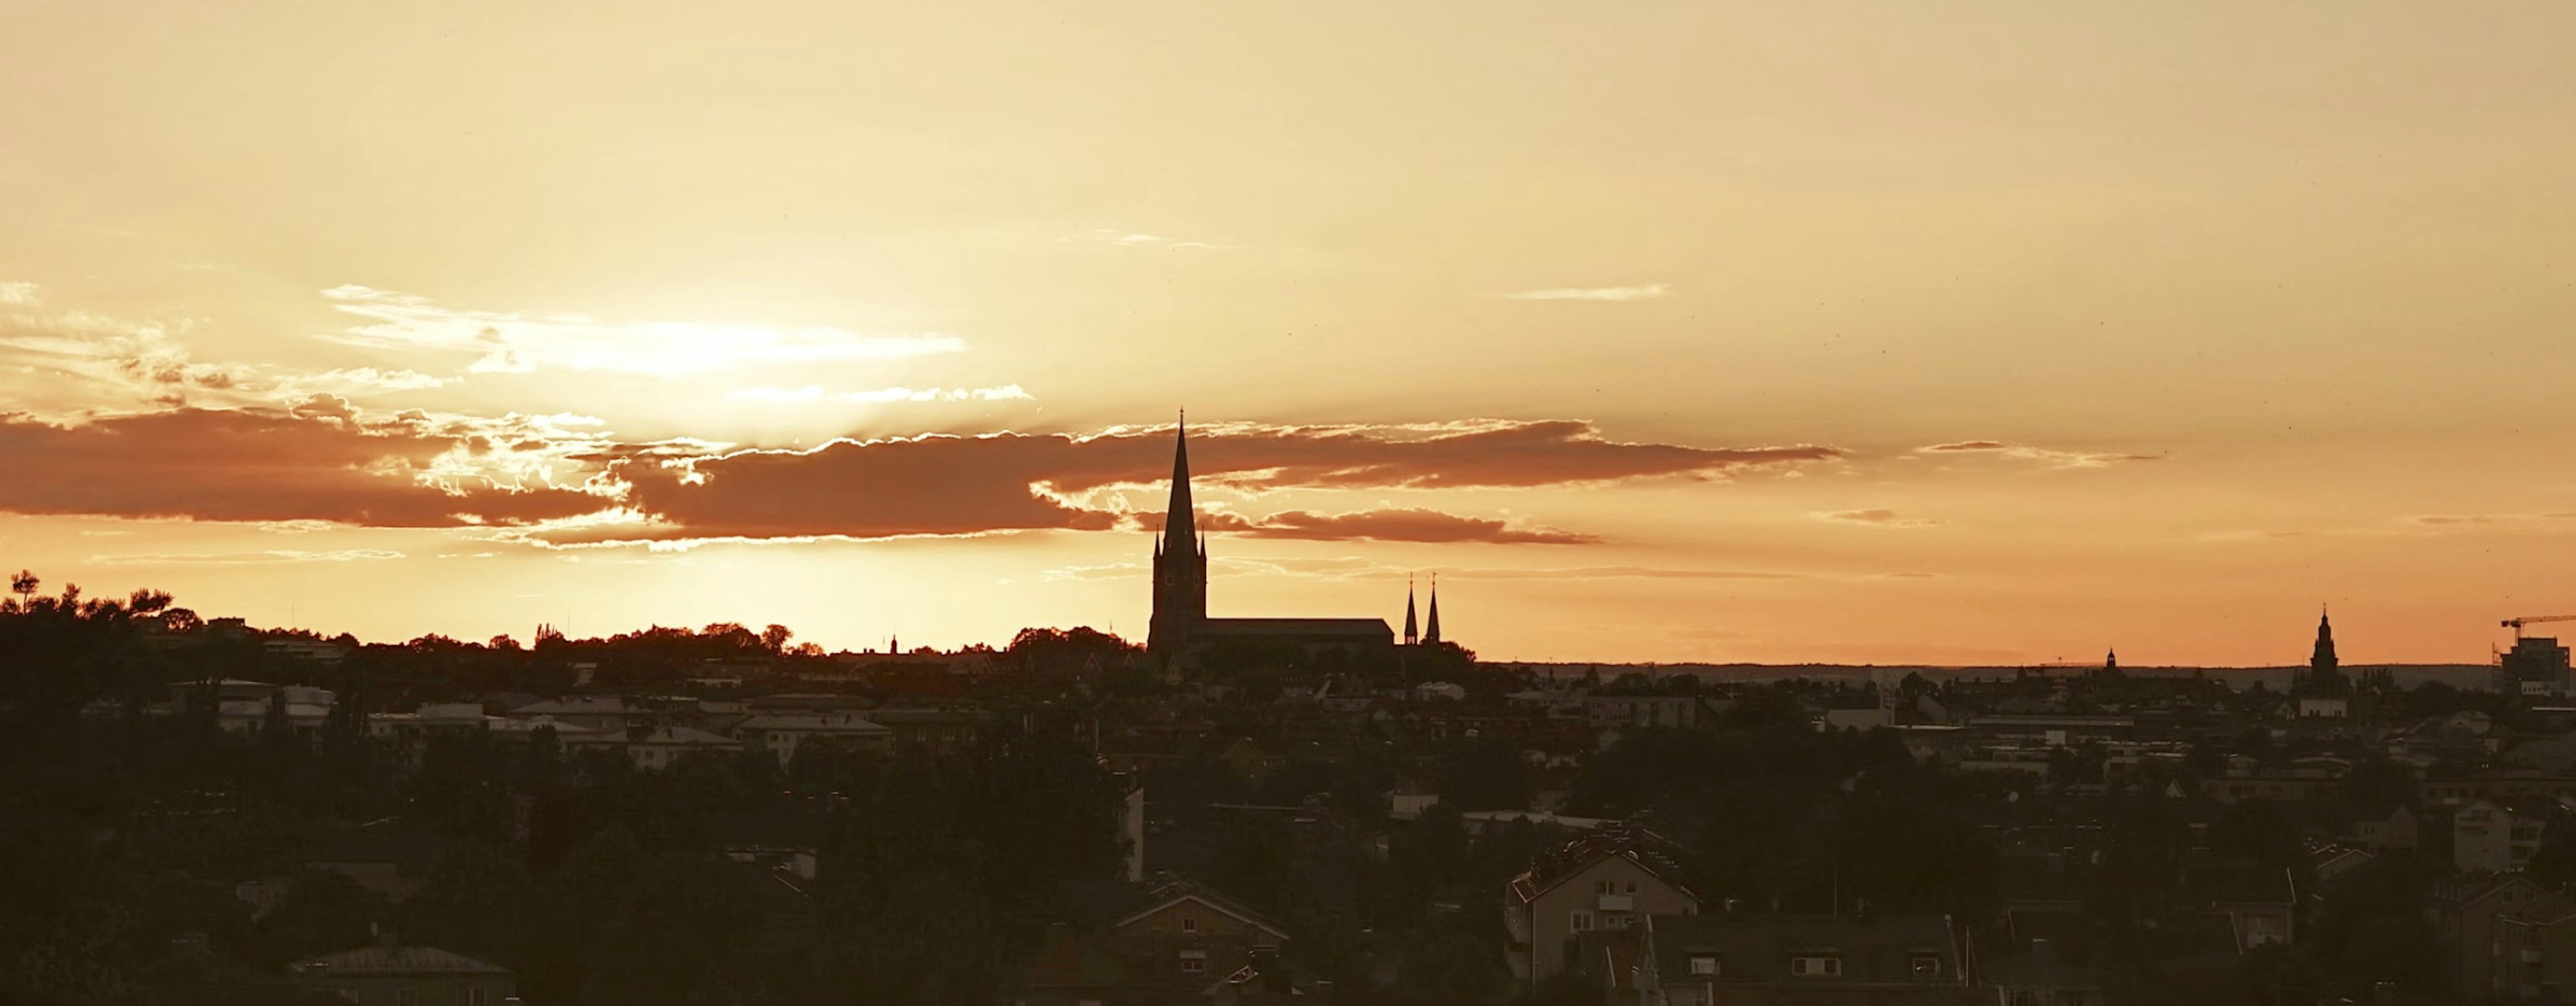 Sunset over the skyline of Linköping with a dramatic sky and the church's spires standing out against the horizon